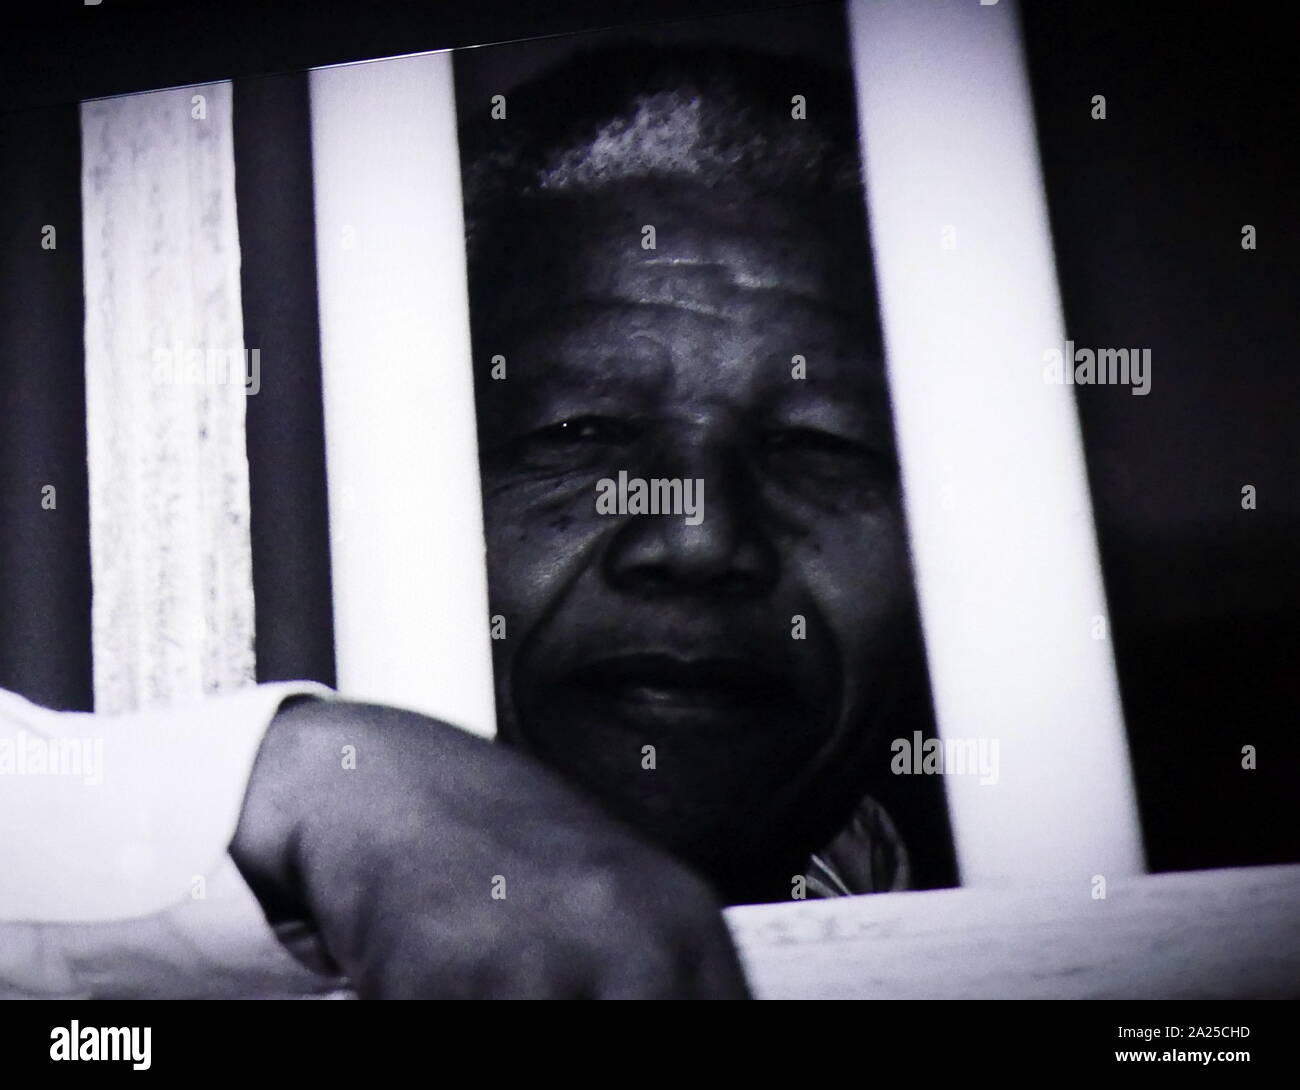 Visit by President Nelson Mandela of South Africa, to his former prison cell on Robben Island Cape town. Nelson Rolihlahla Mandela (1918 – 2013), South African anti-apartheid revolutionary, political leader; served as President of South Africa from 1994 to 1999 Stock Photo